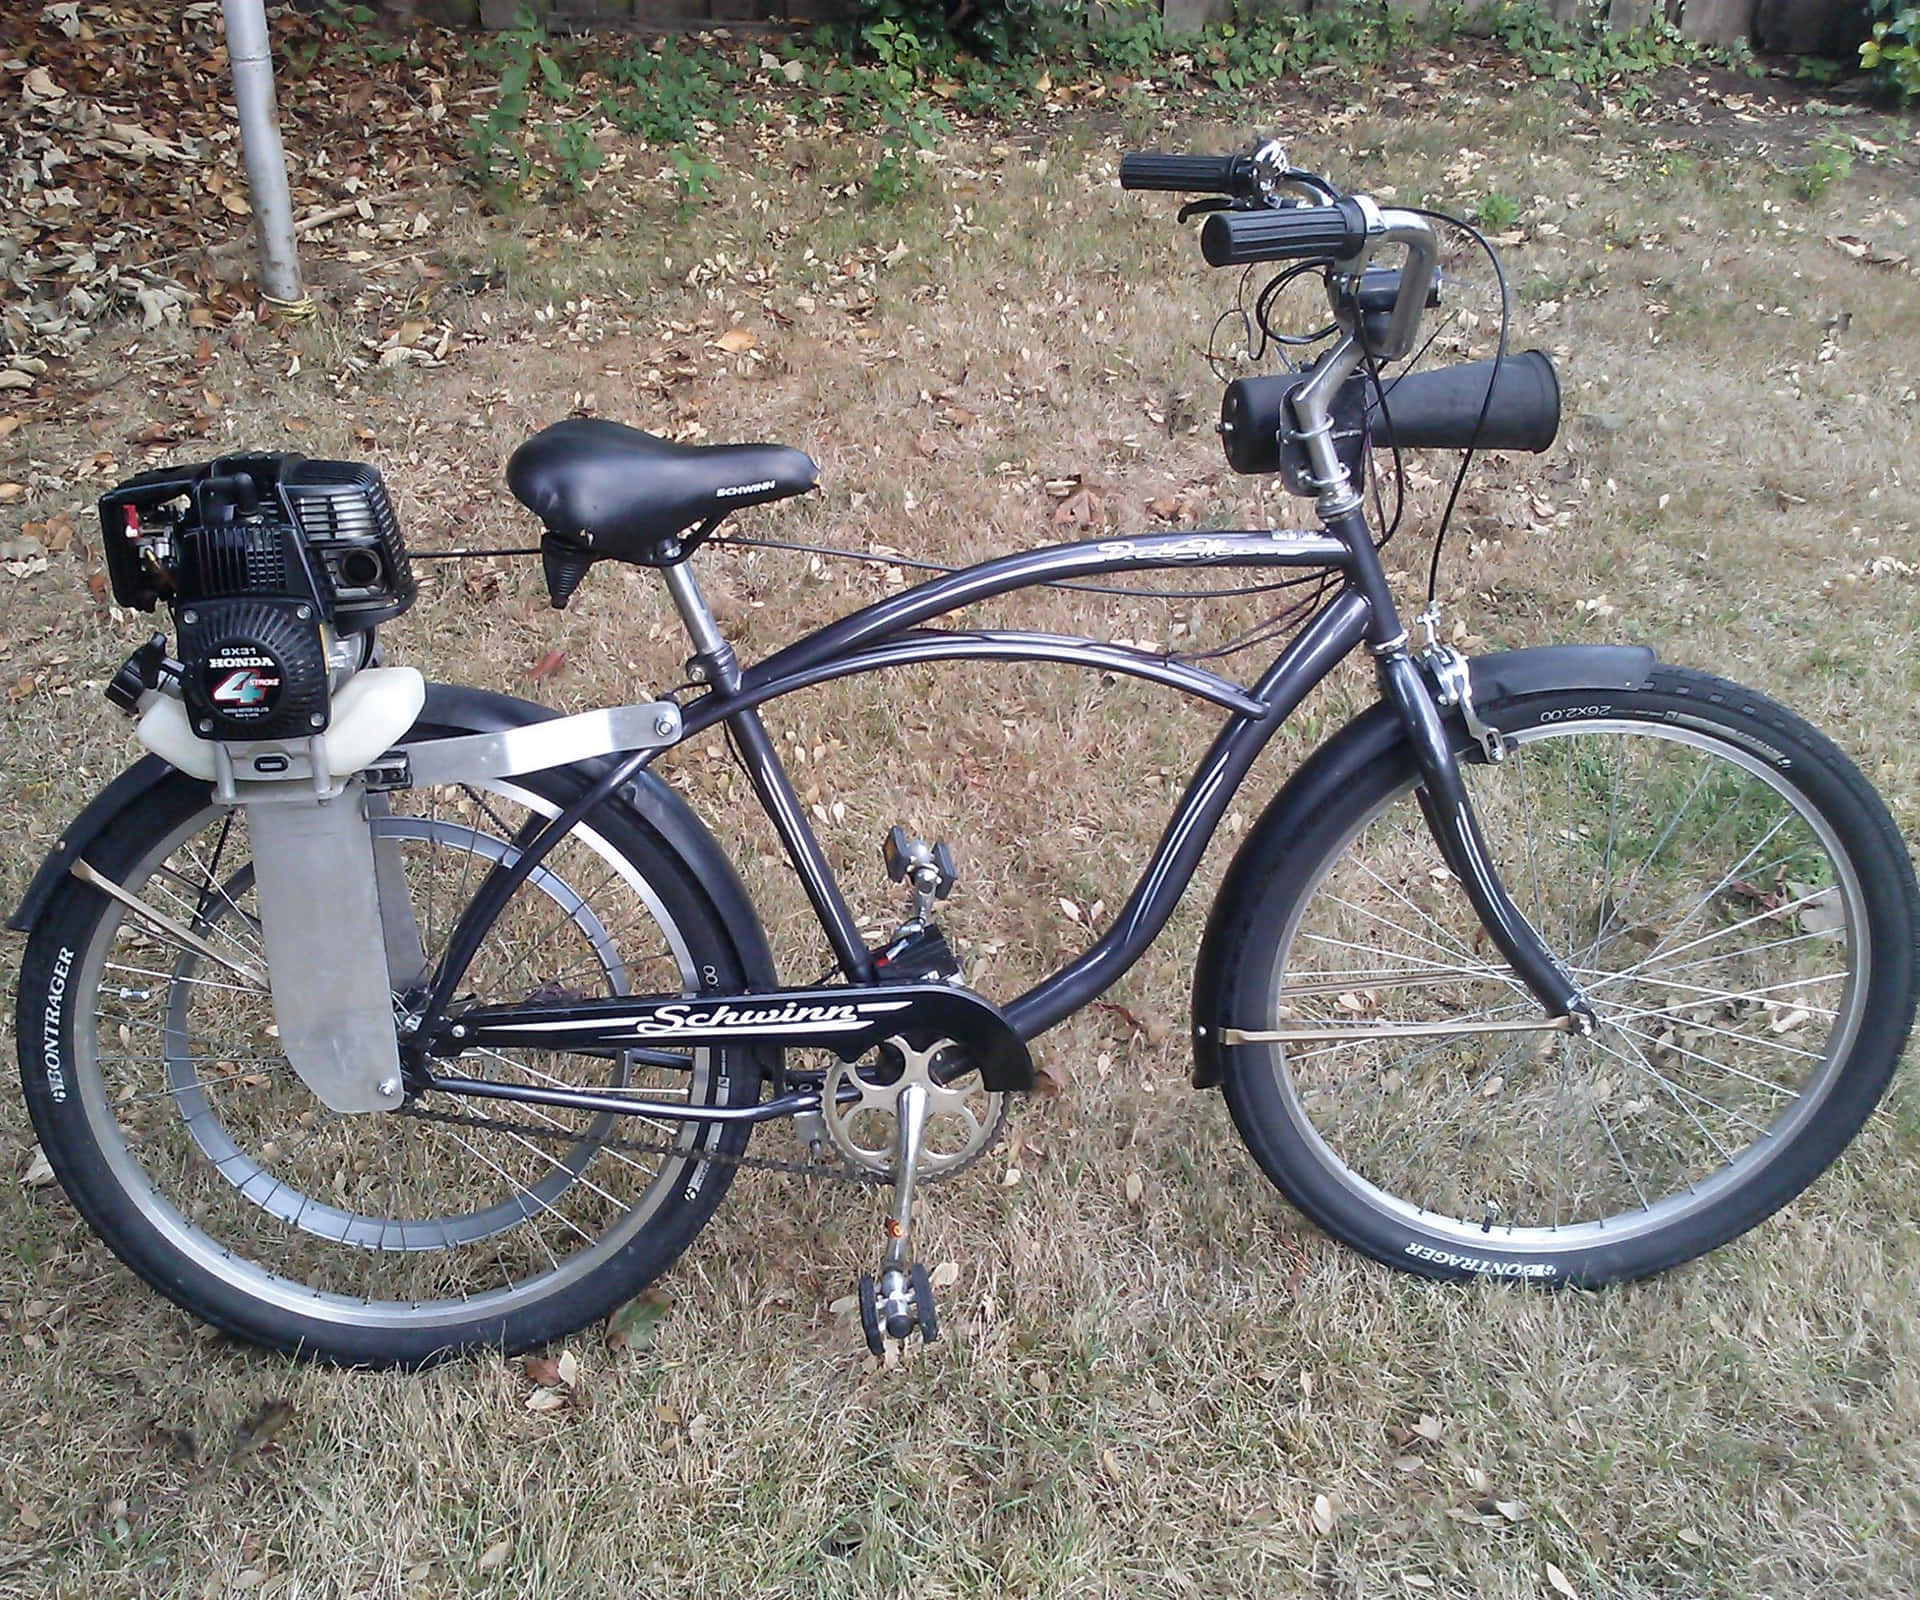 A Bike With A Motor